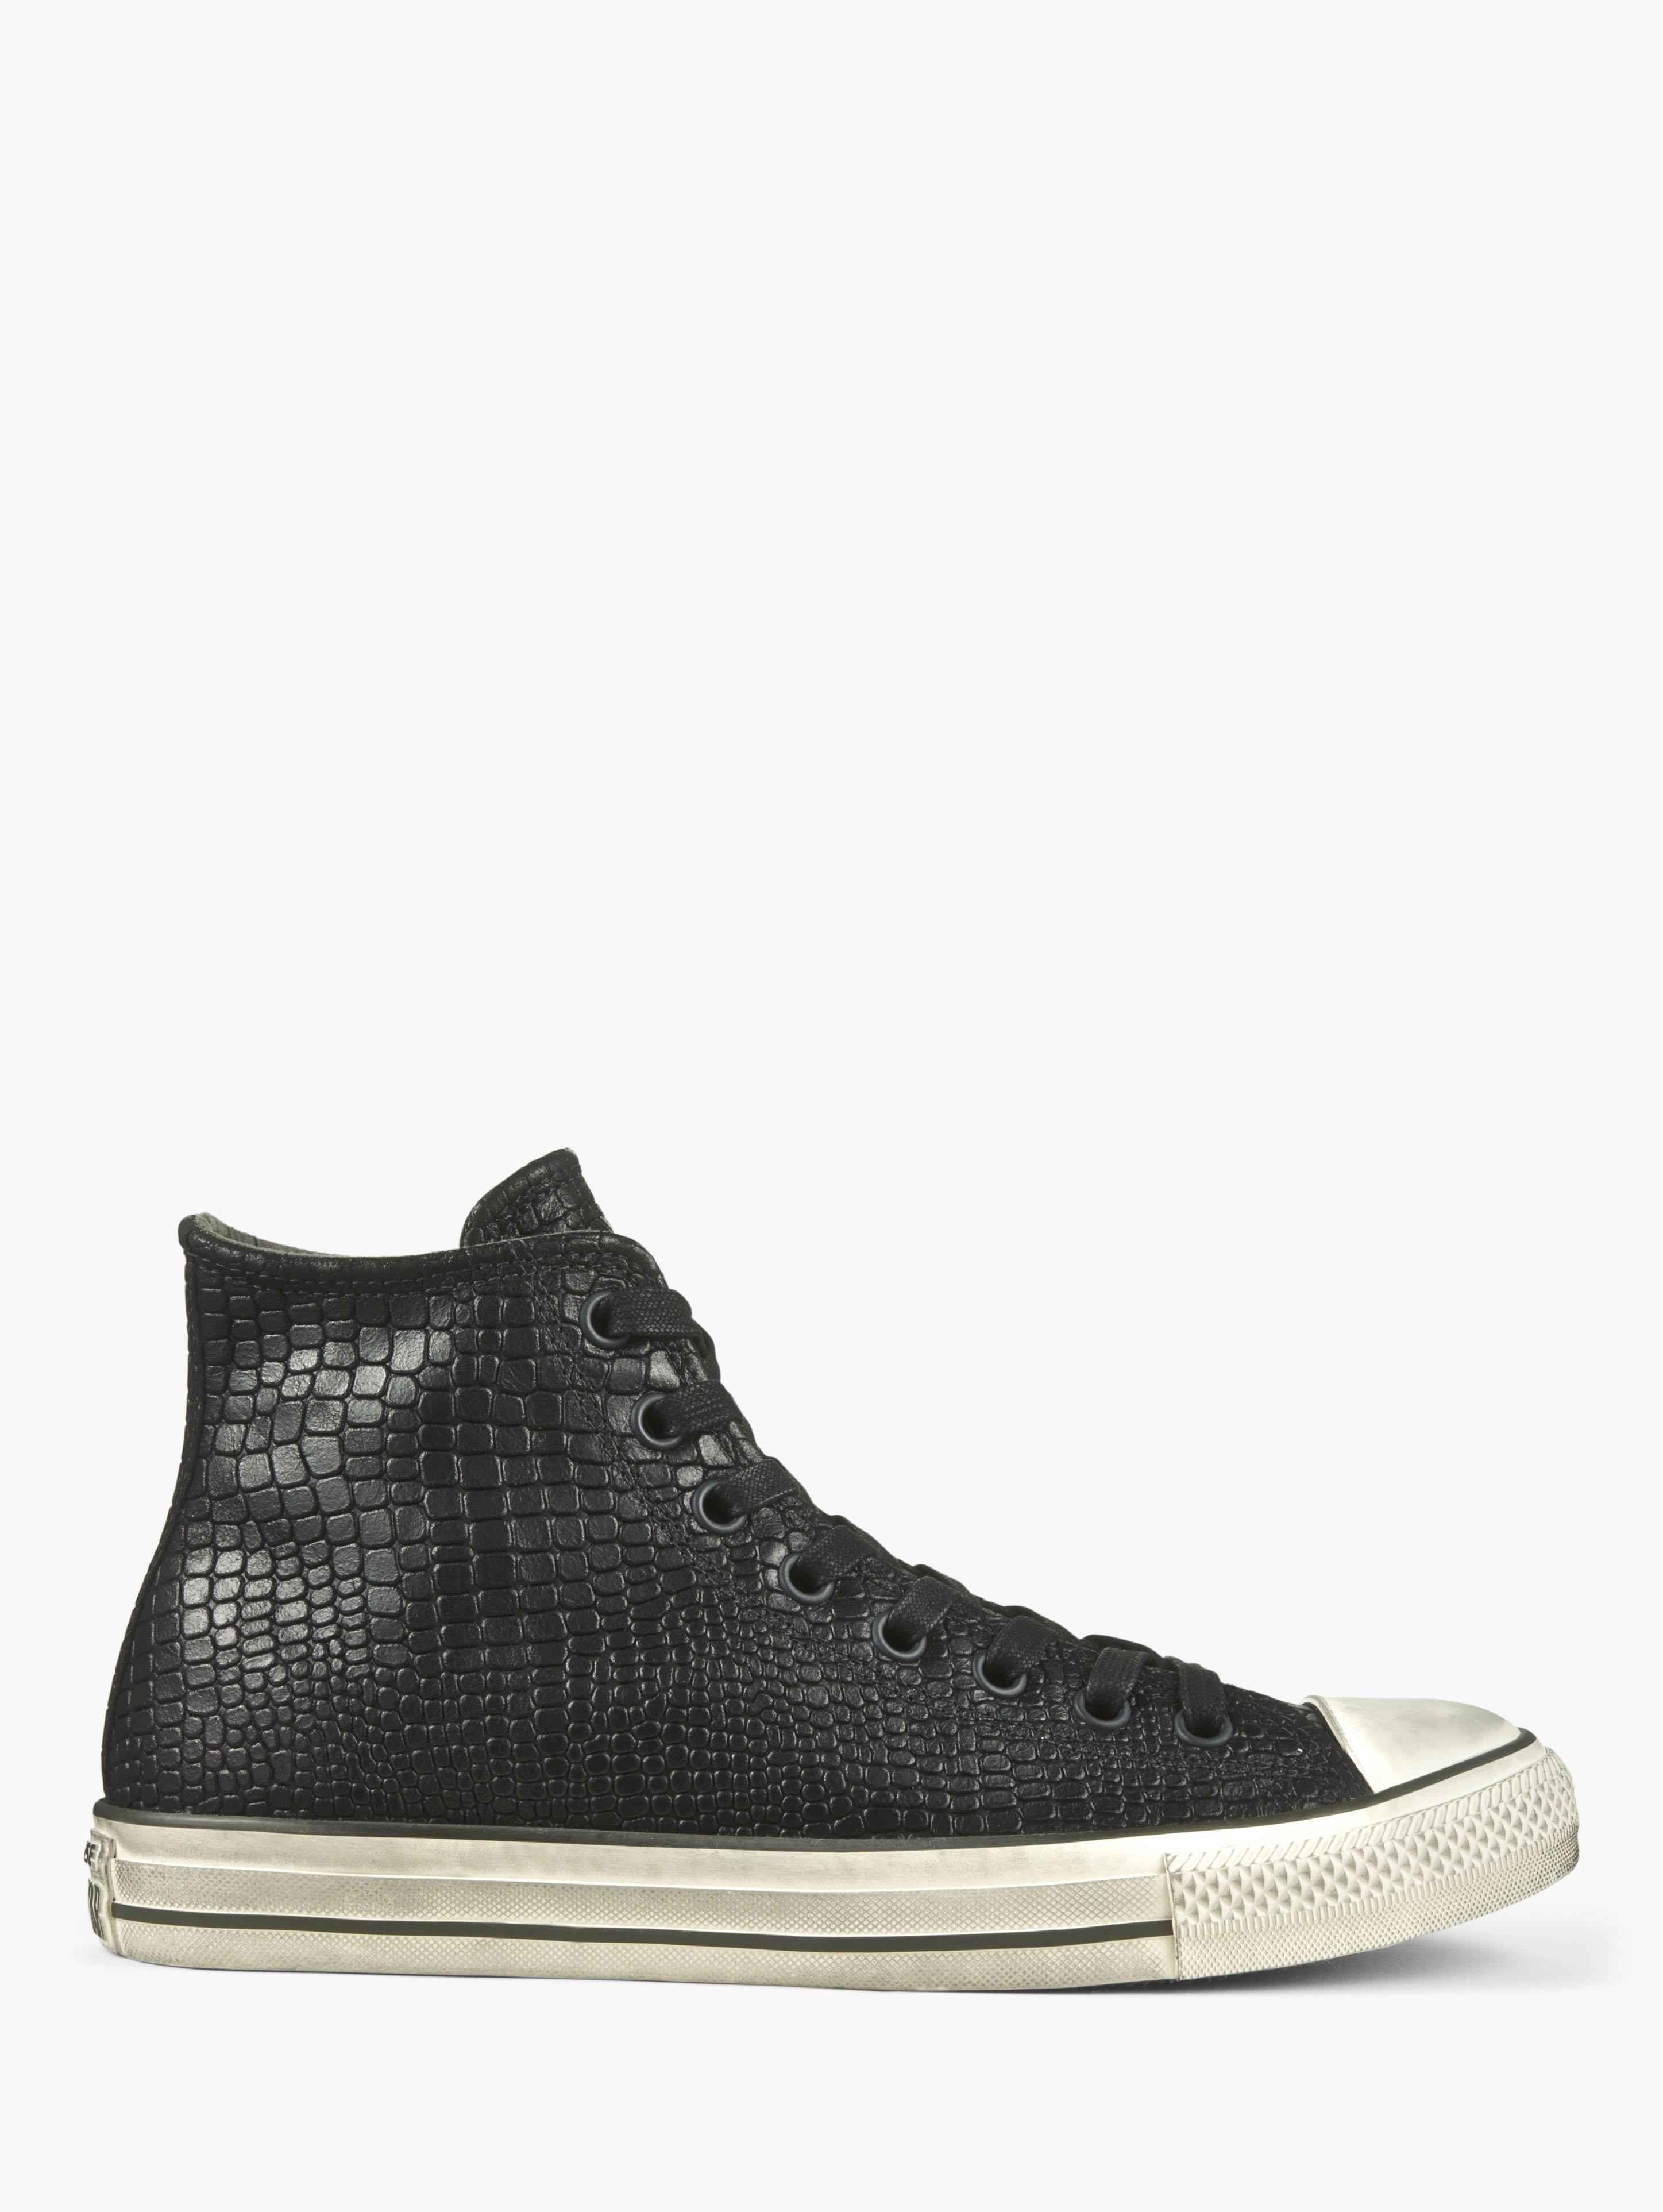 Reptile Embossed Chuck Taylor High Top image number 4